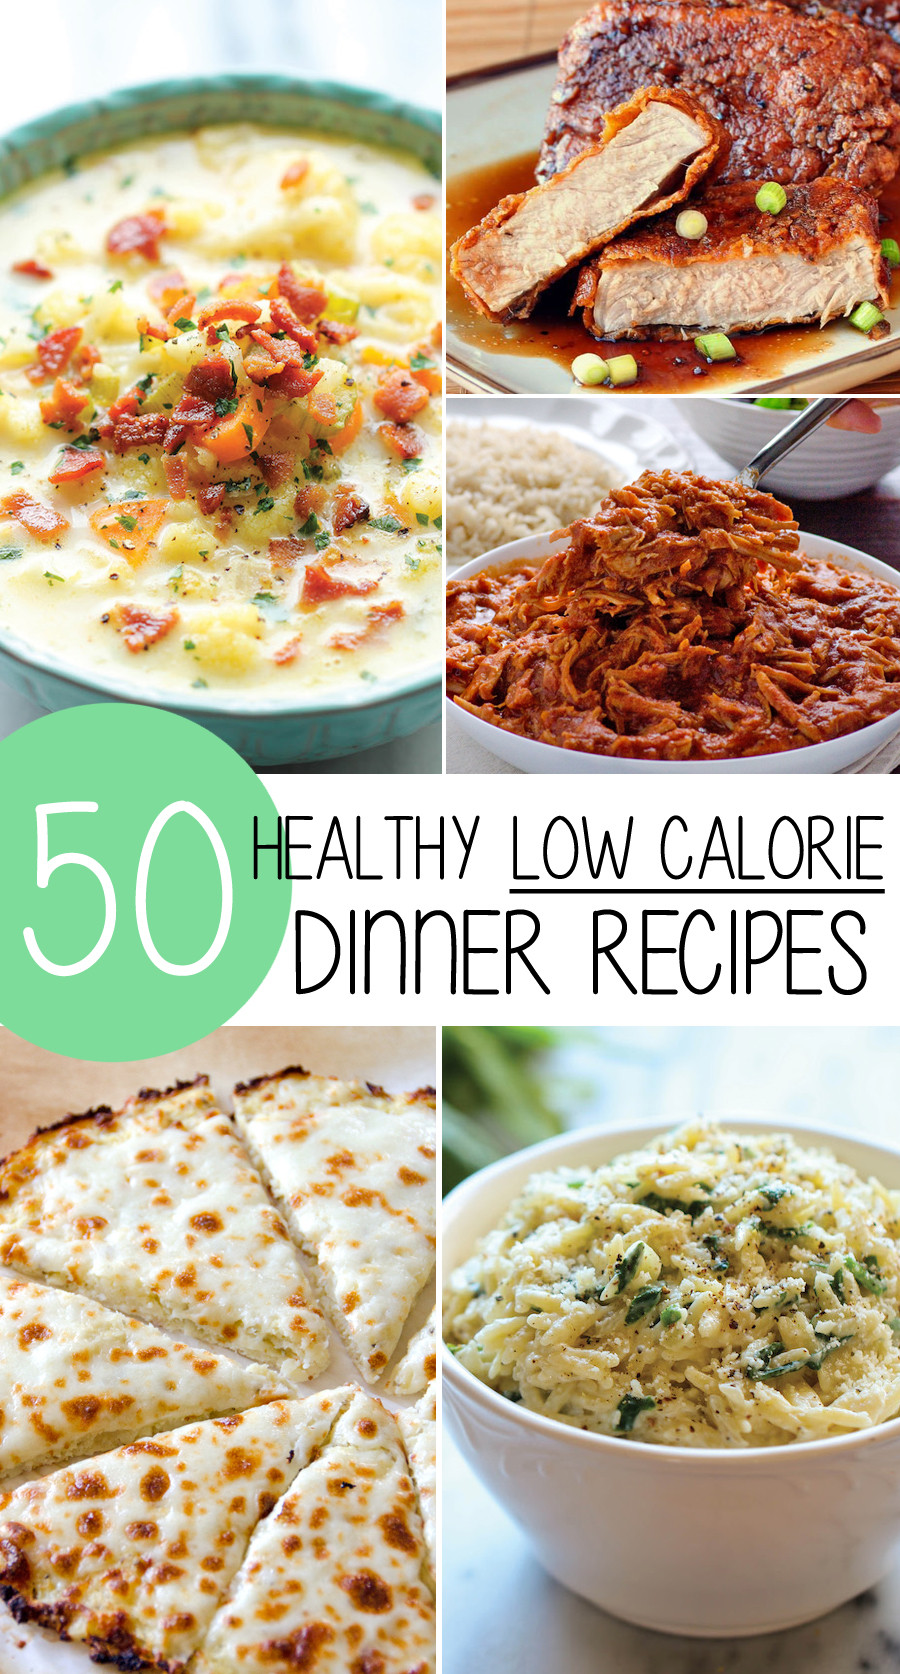 Weight Loss Foods Recipes
 50 Healthy Low Calorie Weight Loss Dinner Recipes